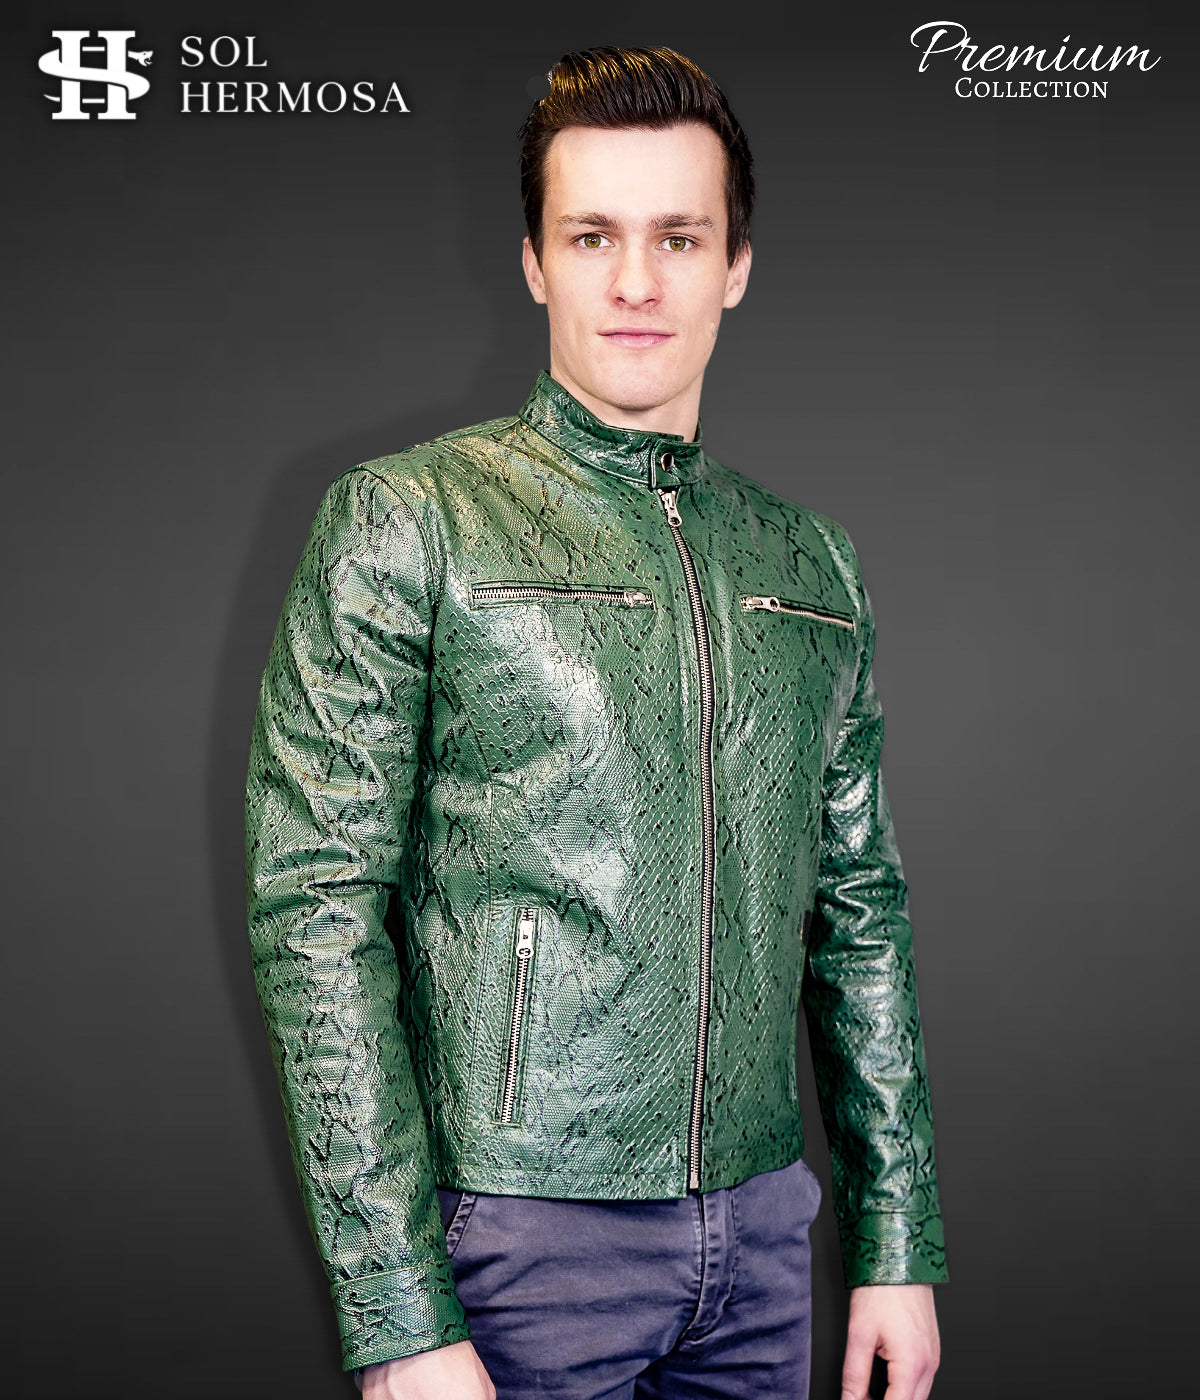 Real Leather Jacket For Men - Aether